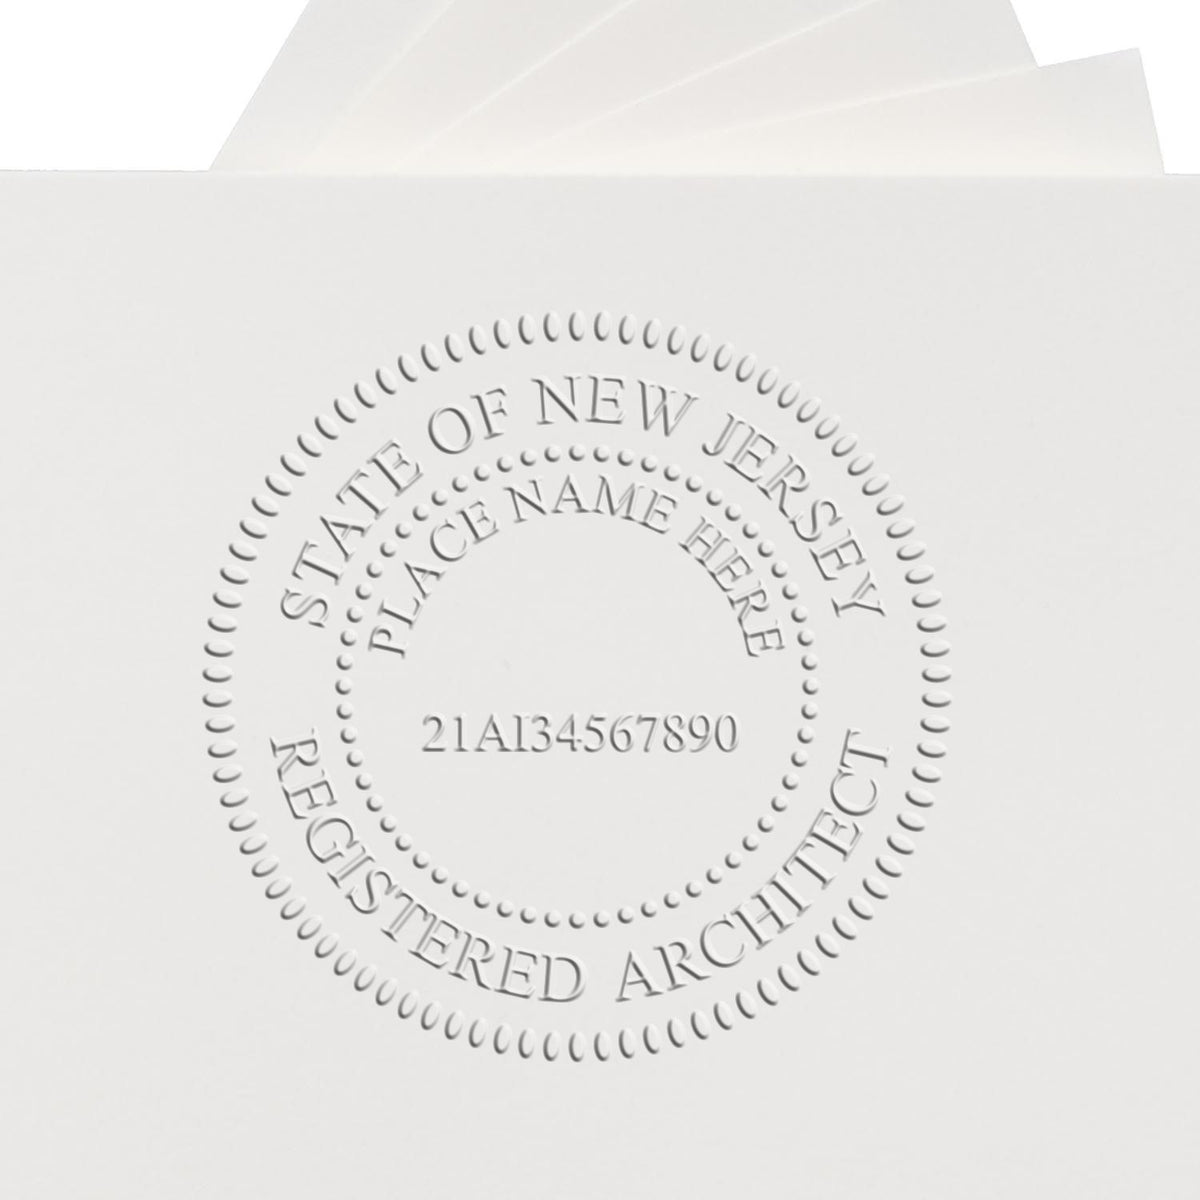 A lifestyle photo showing a stamped image of the New Jersey Desk Architect Embossing Seal on a piece of paper